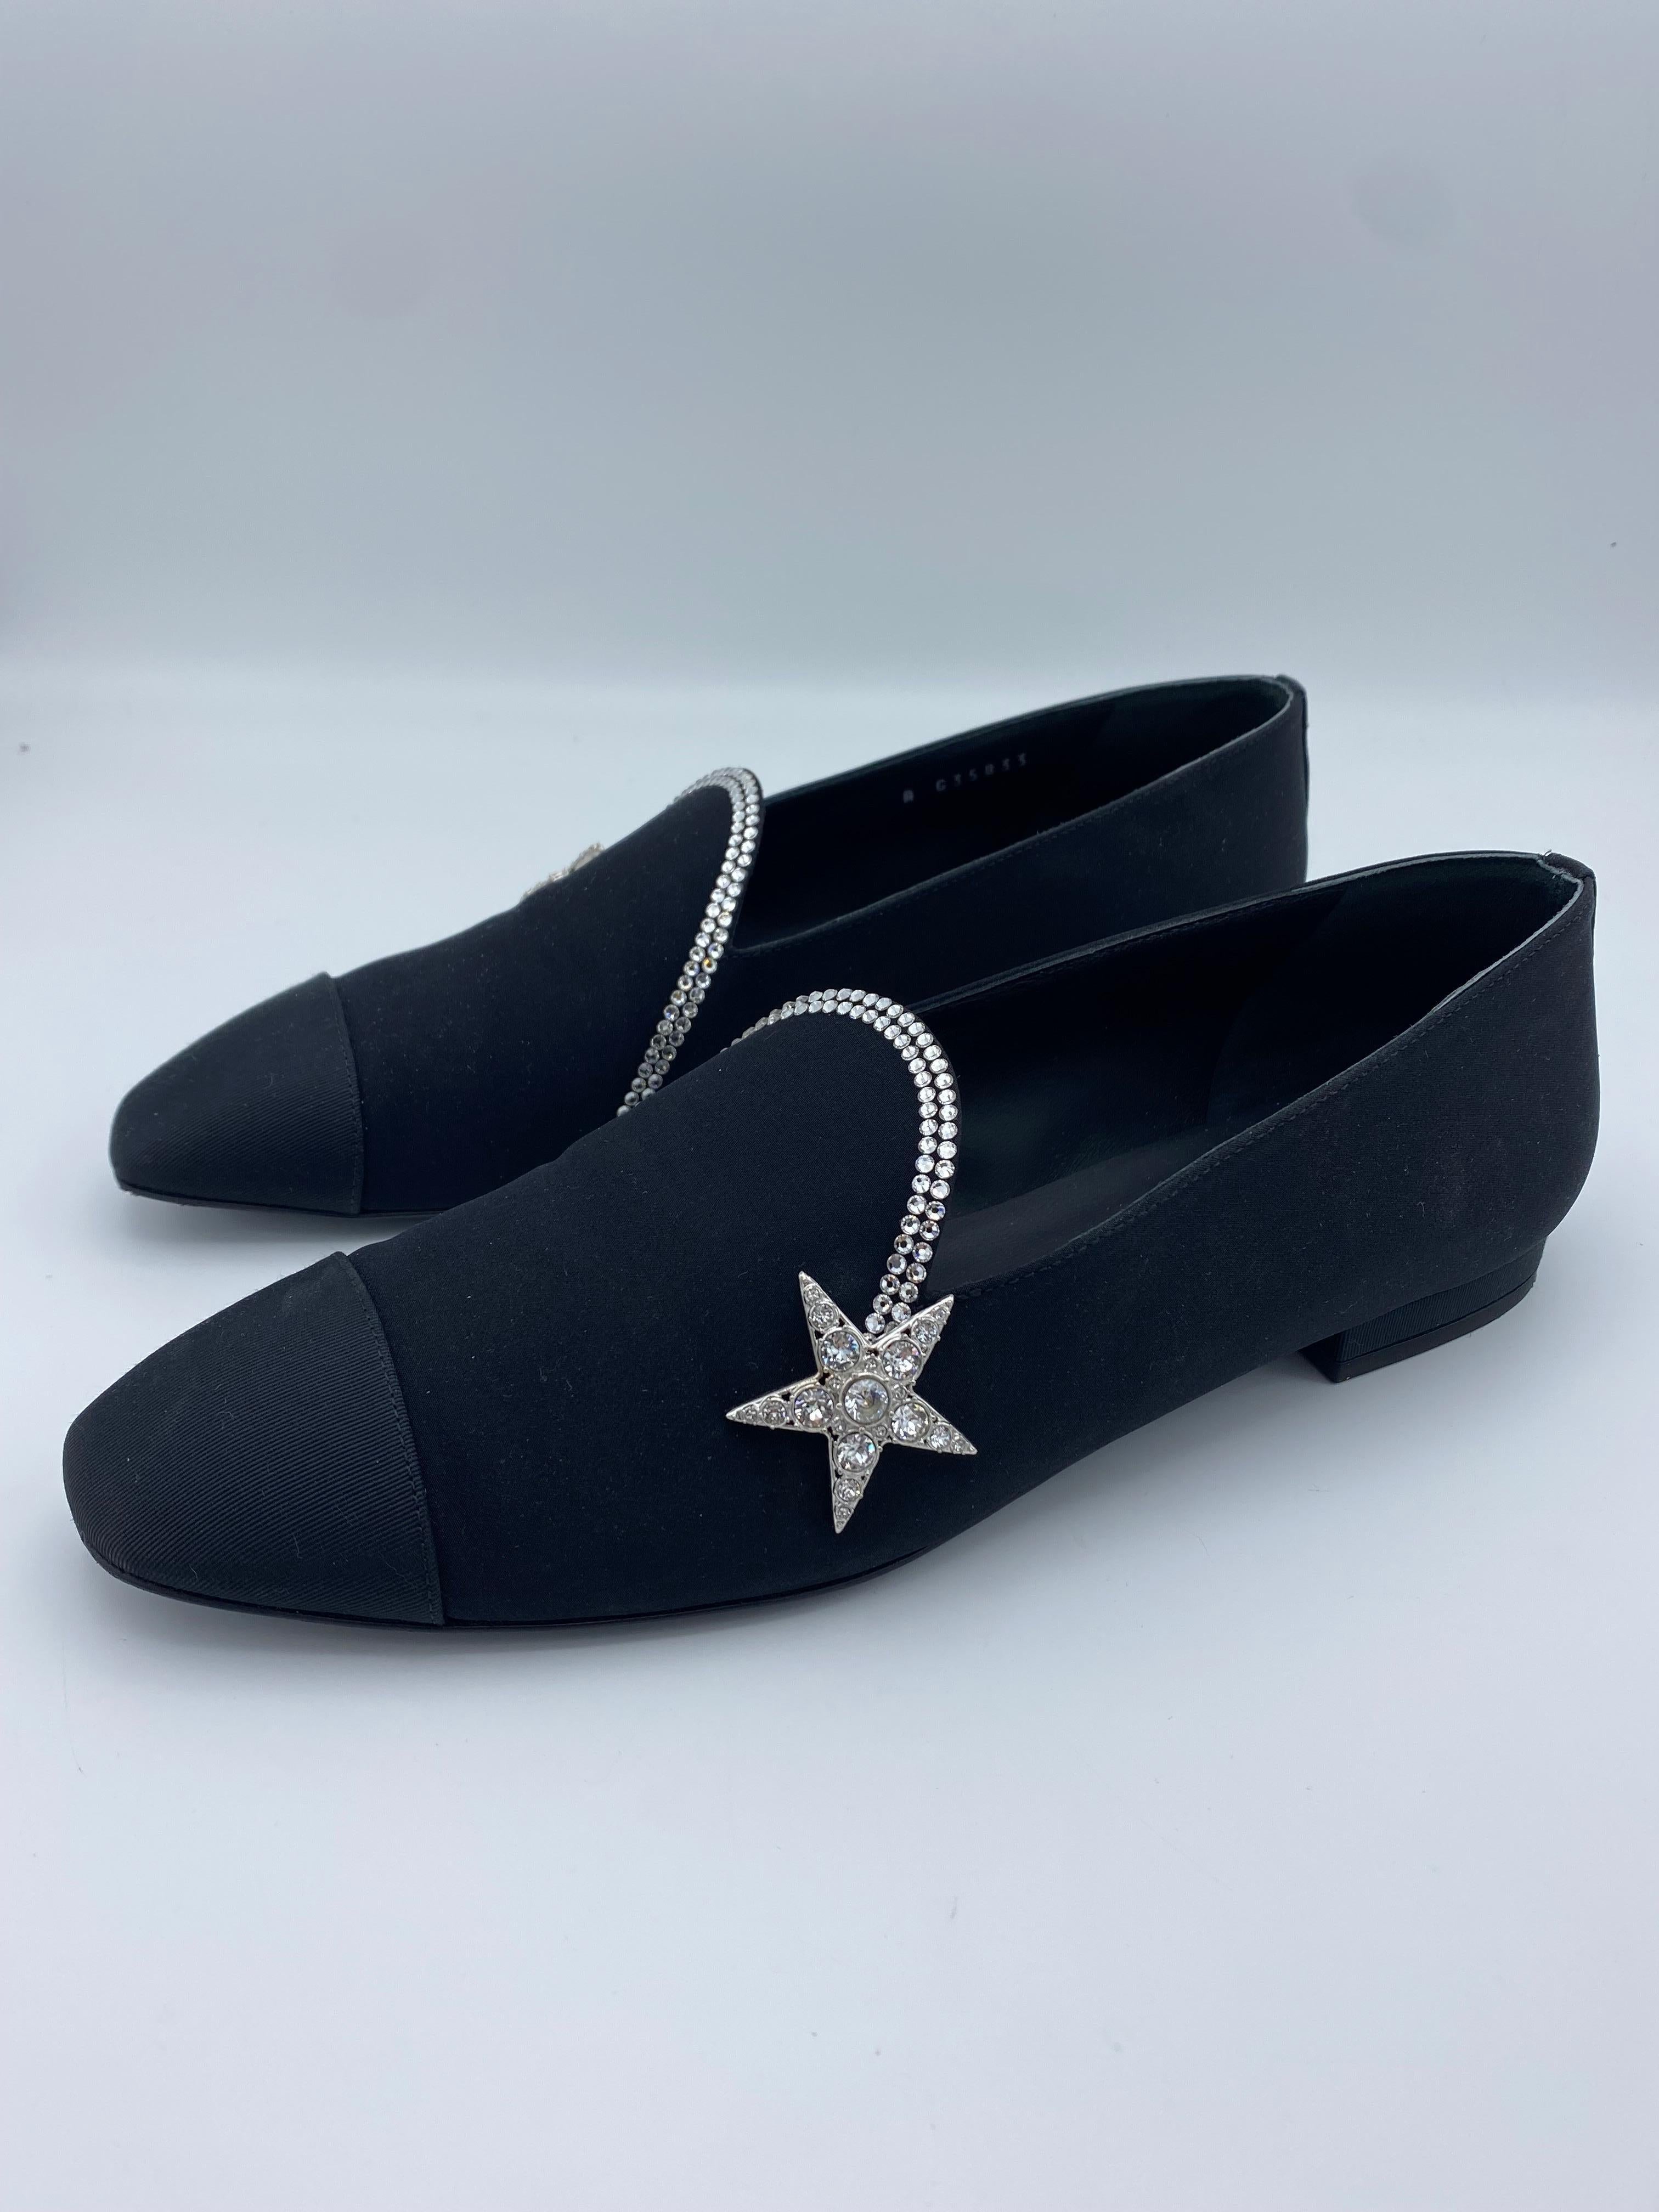 Product details:

The loafers are made out of black silk crepe and grosgrain, detailed with Swarovski crystals design. The heel height measures 0.5